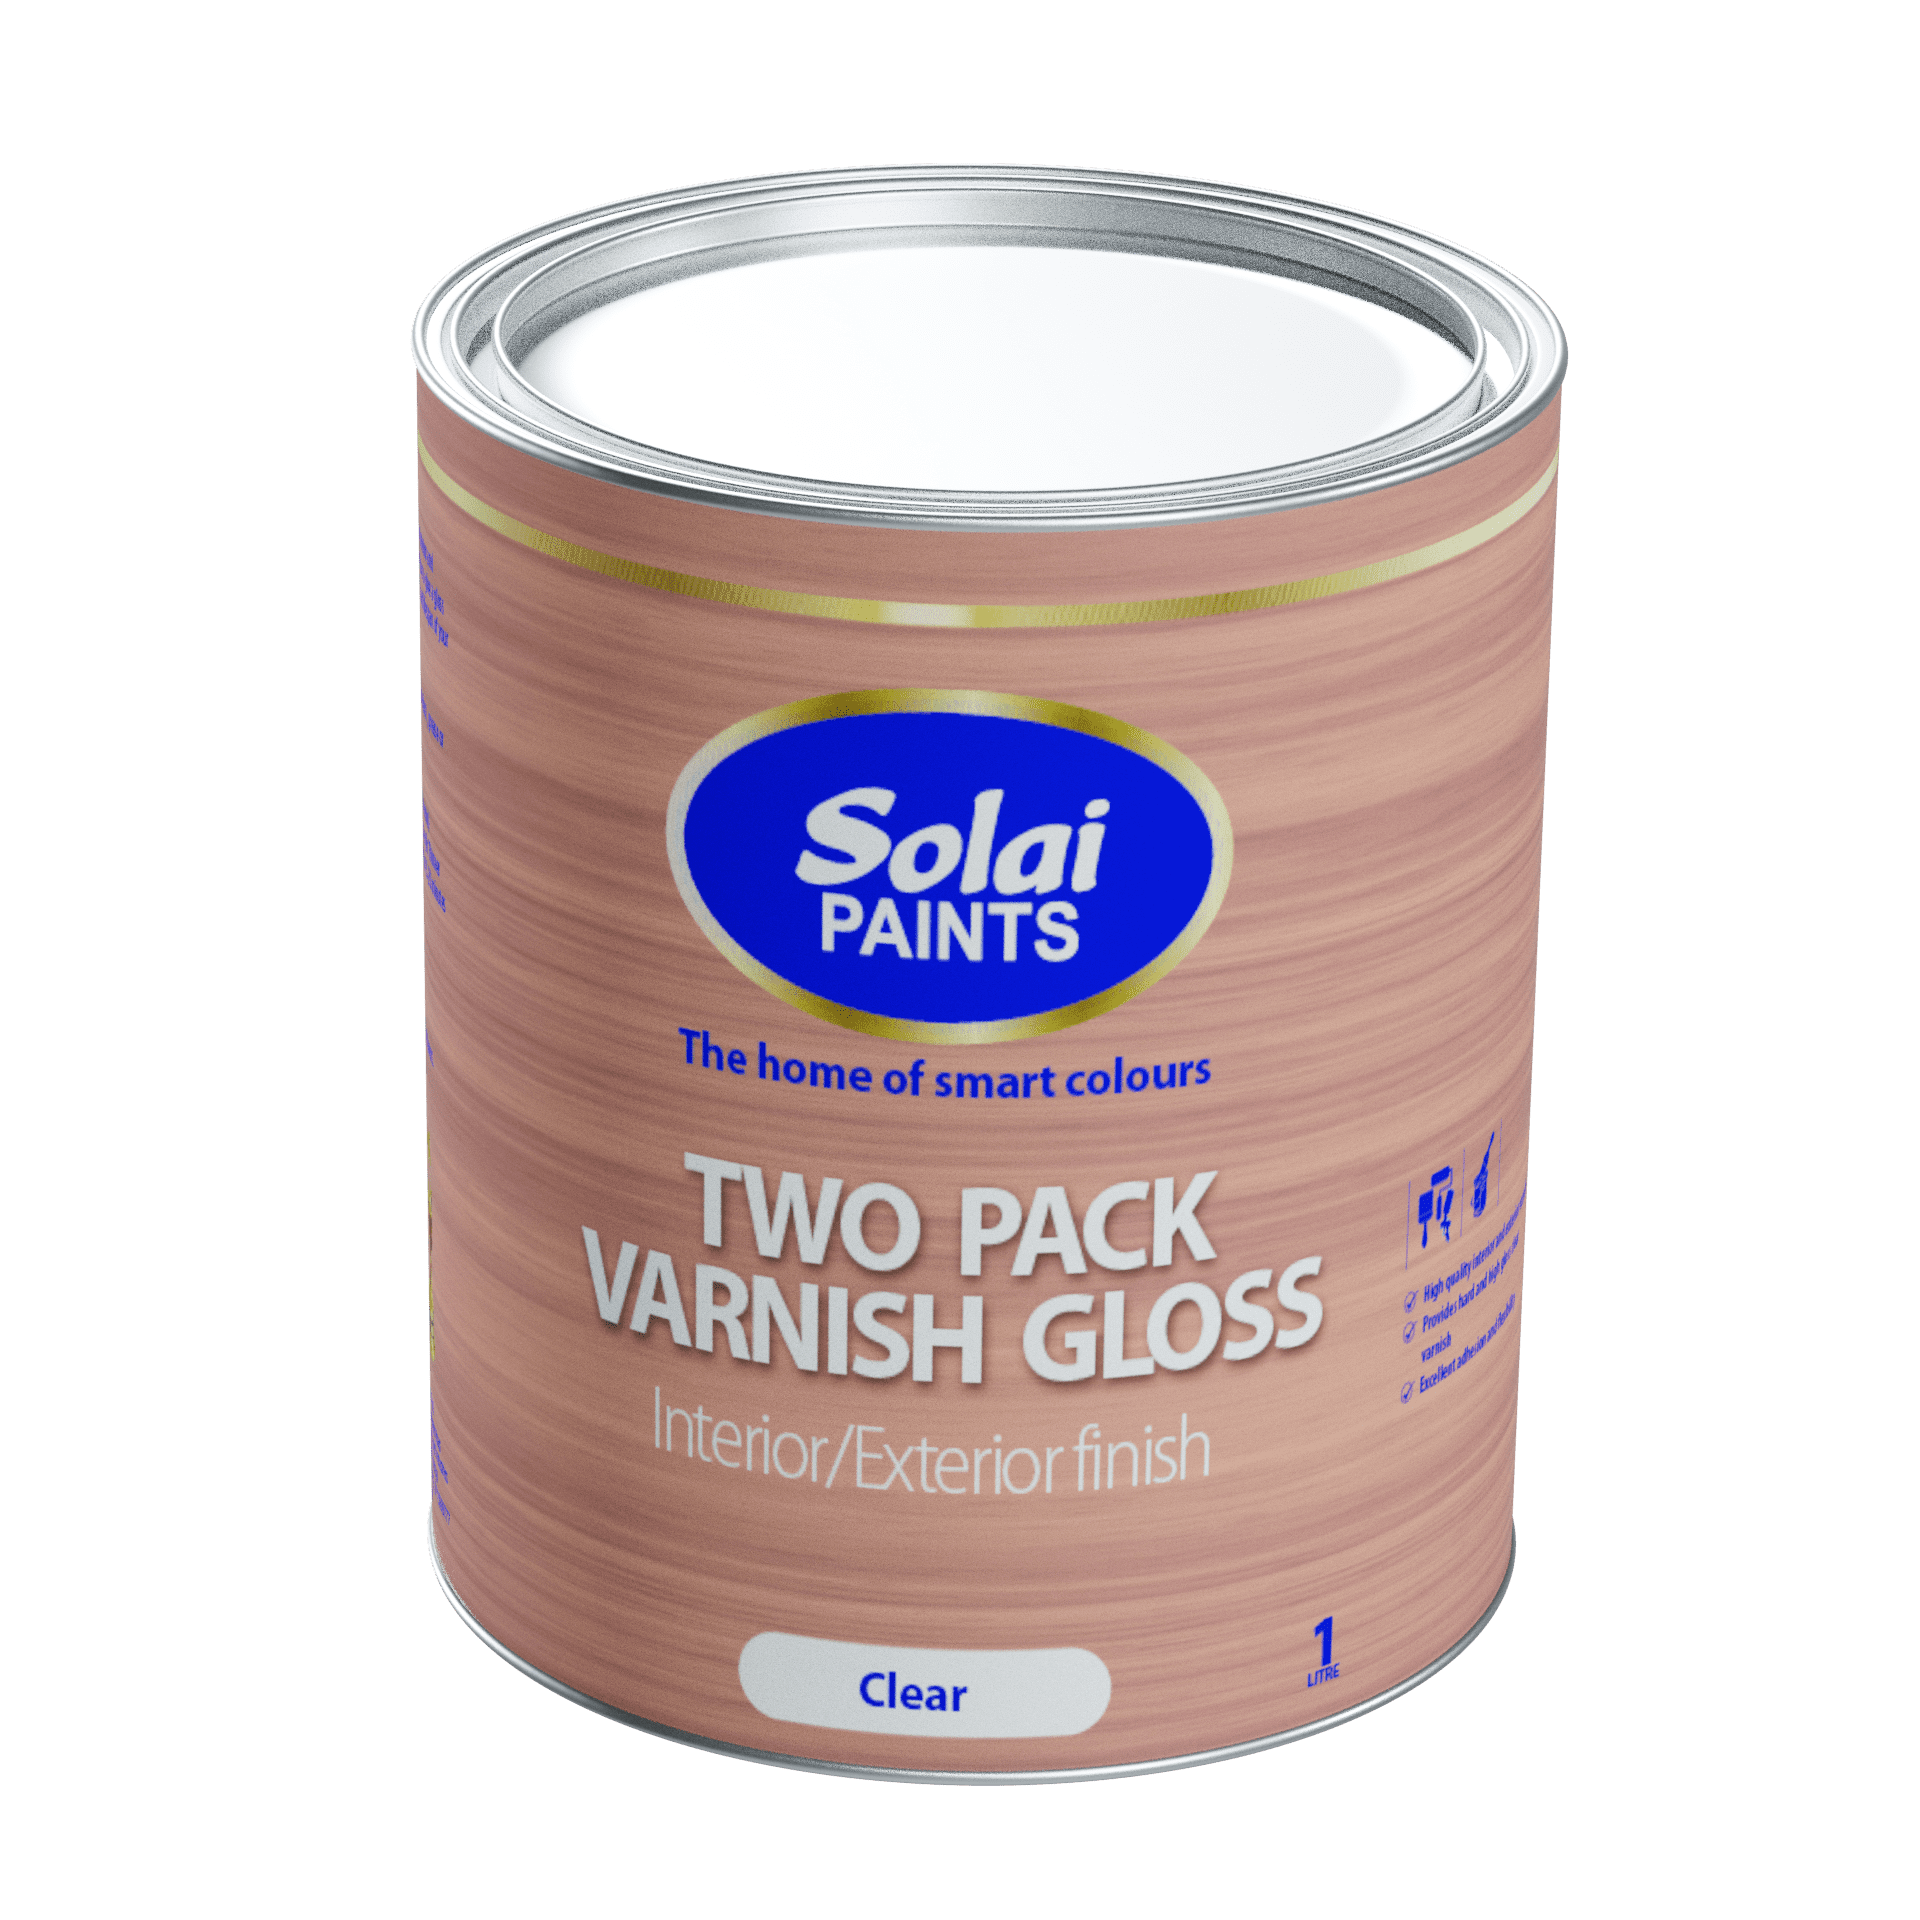 Two Pack Varnish Gloss, High quality interior and exterior varnish, Best Two Pack Varnish, Quality Two Pack Varnish, Most durable wood finish, Quality wood finish.